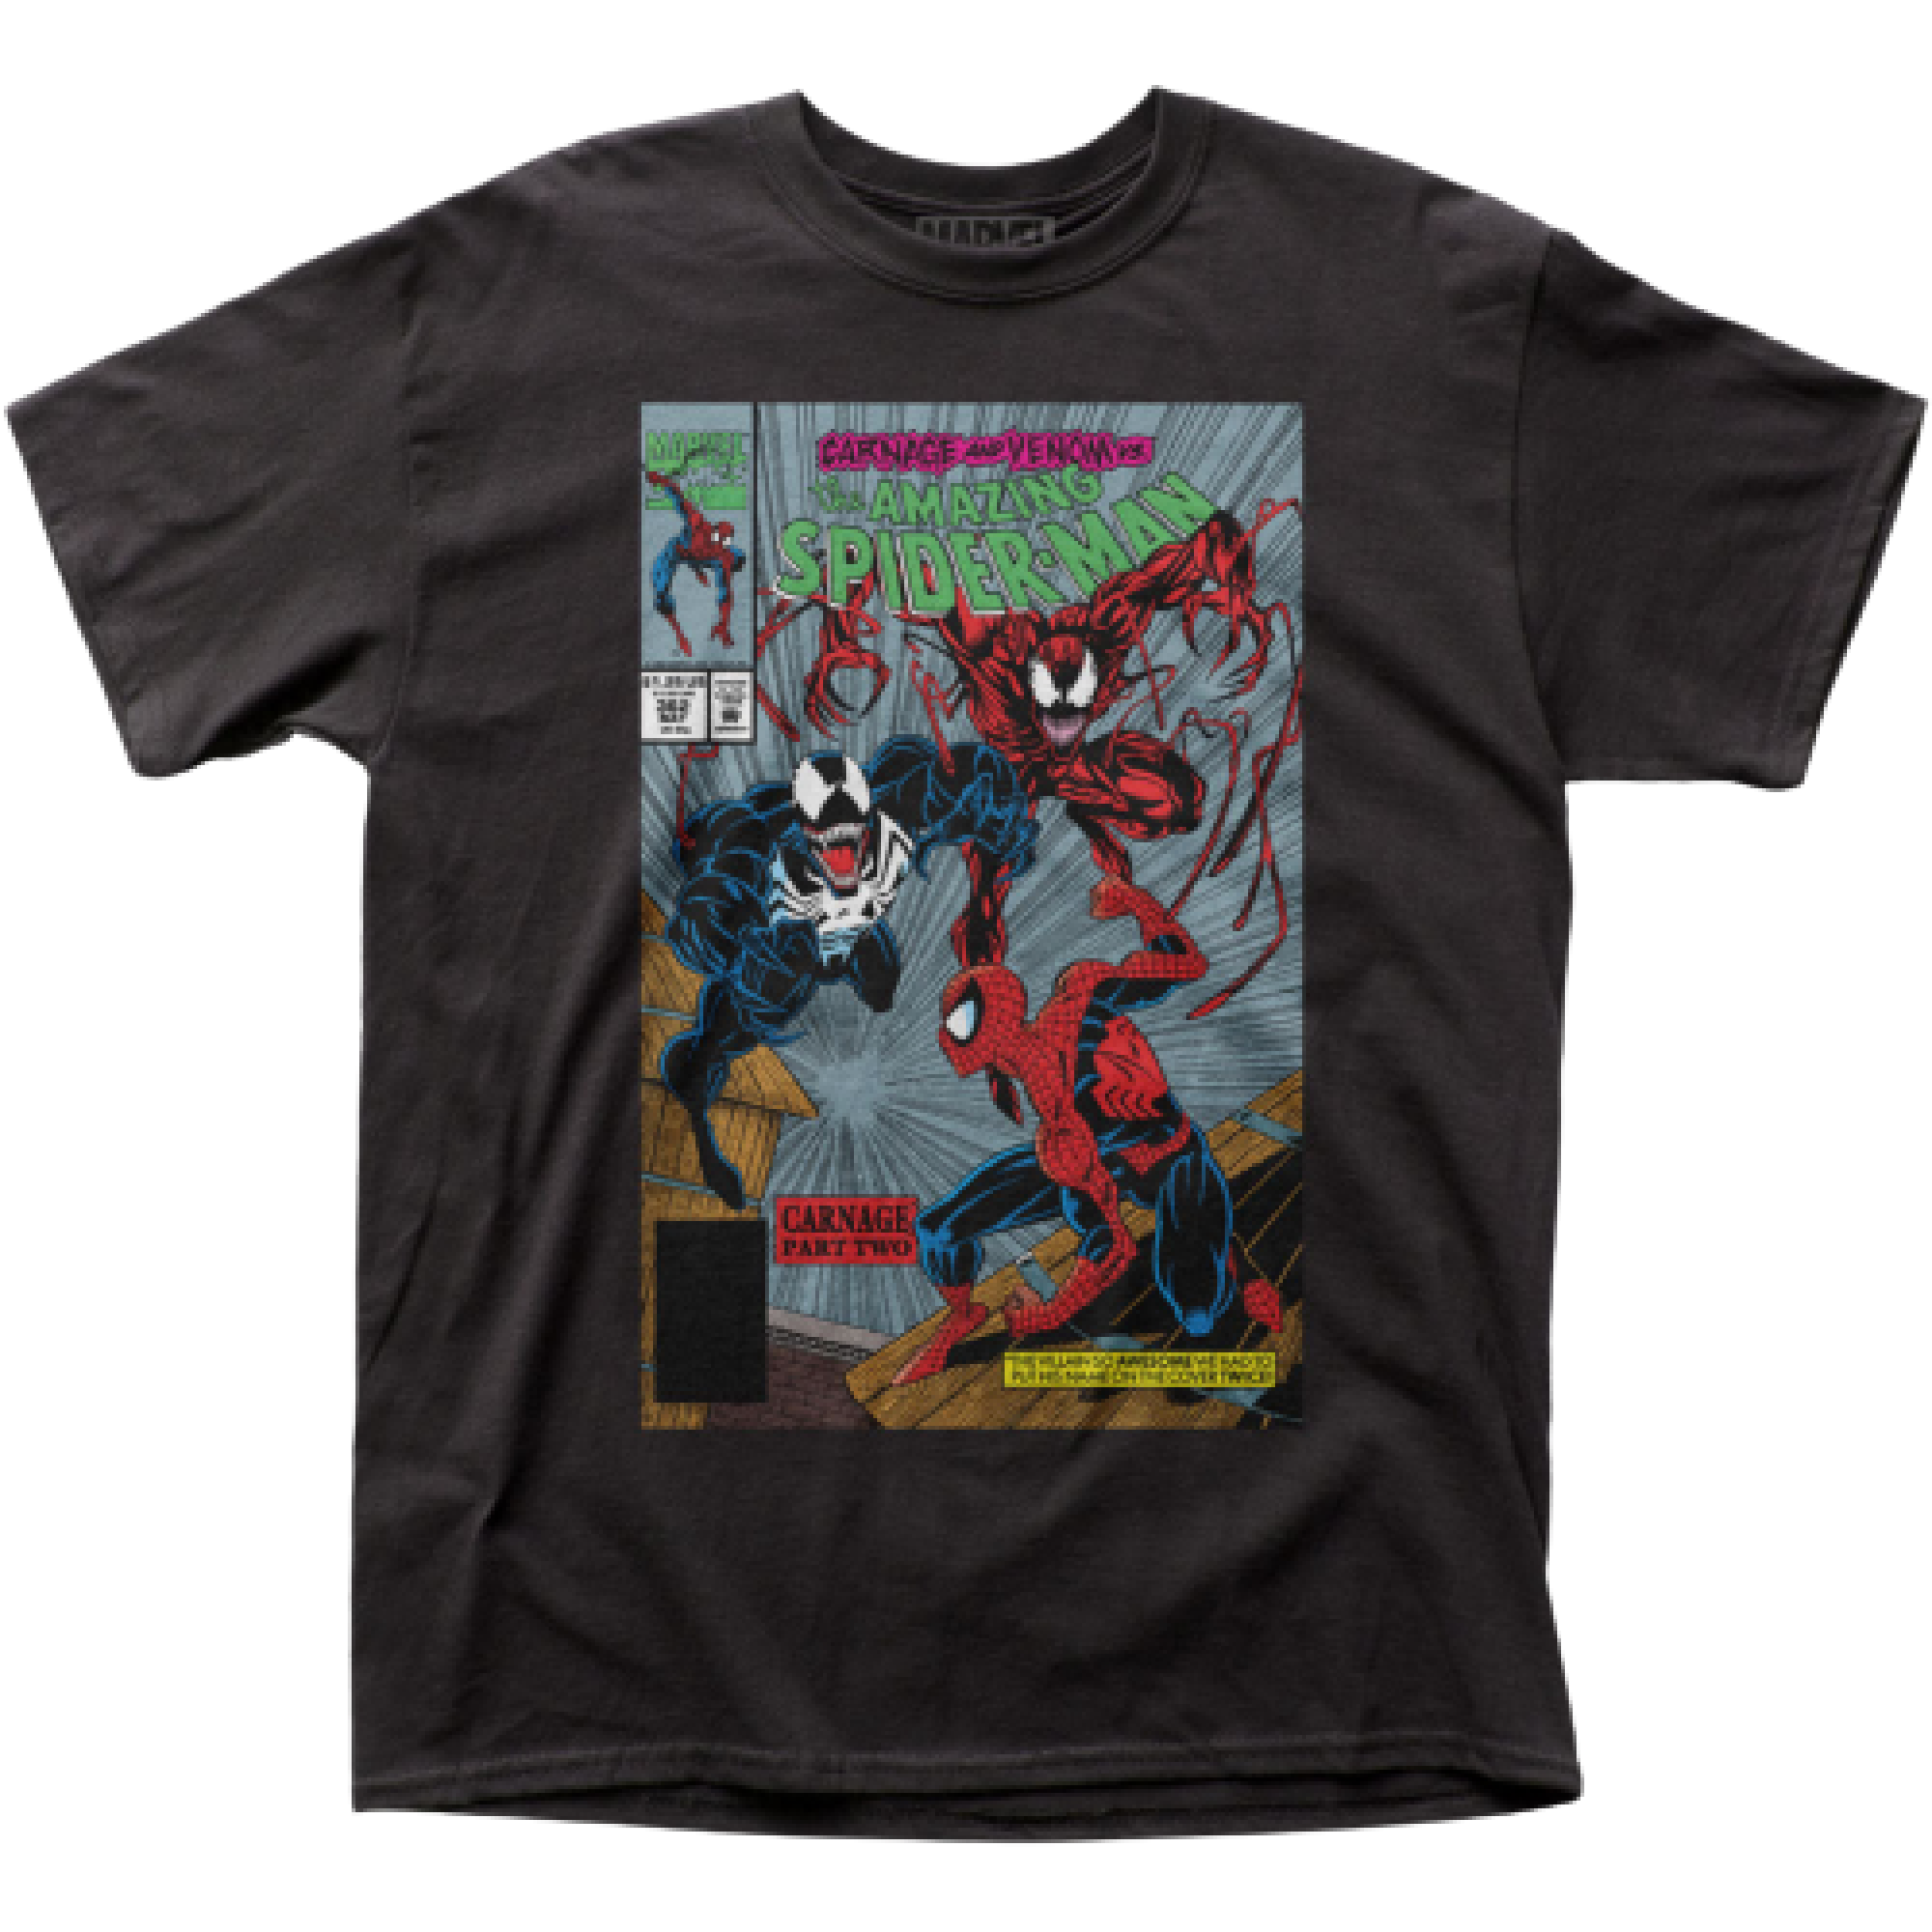 Spider-Man Venom vs Carnage Comic Cover Part Two T-Shirt 2XLarge 